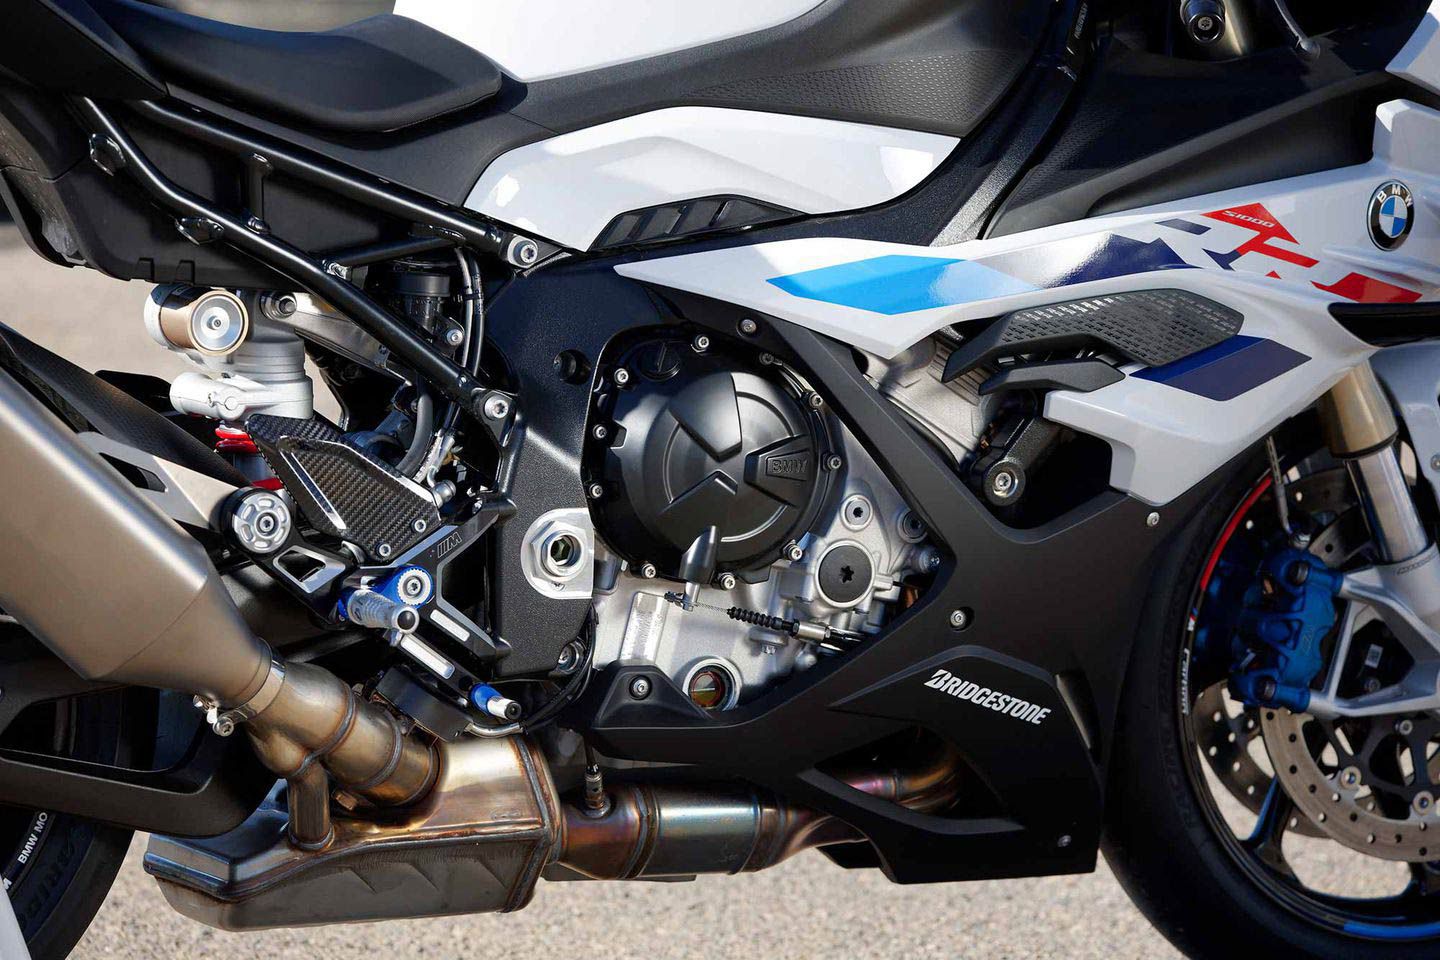 Riders will have a love/hate relationship with the S 1000 RR’s engine. There’s no denying the incredible performance, but emissions regulations mean US-bound S 1000 RR’s don’t produce the same power as their European counterparts.